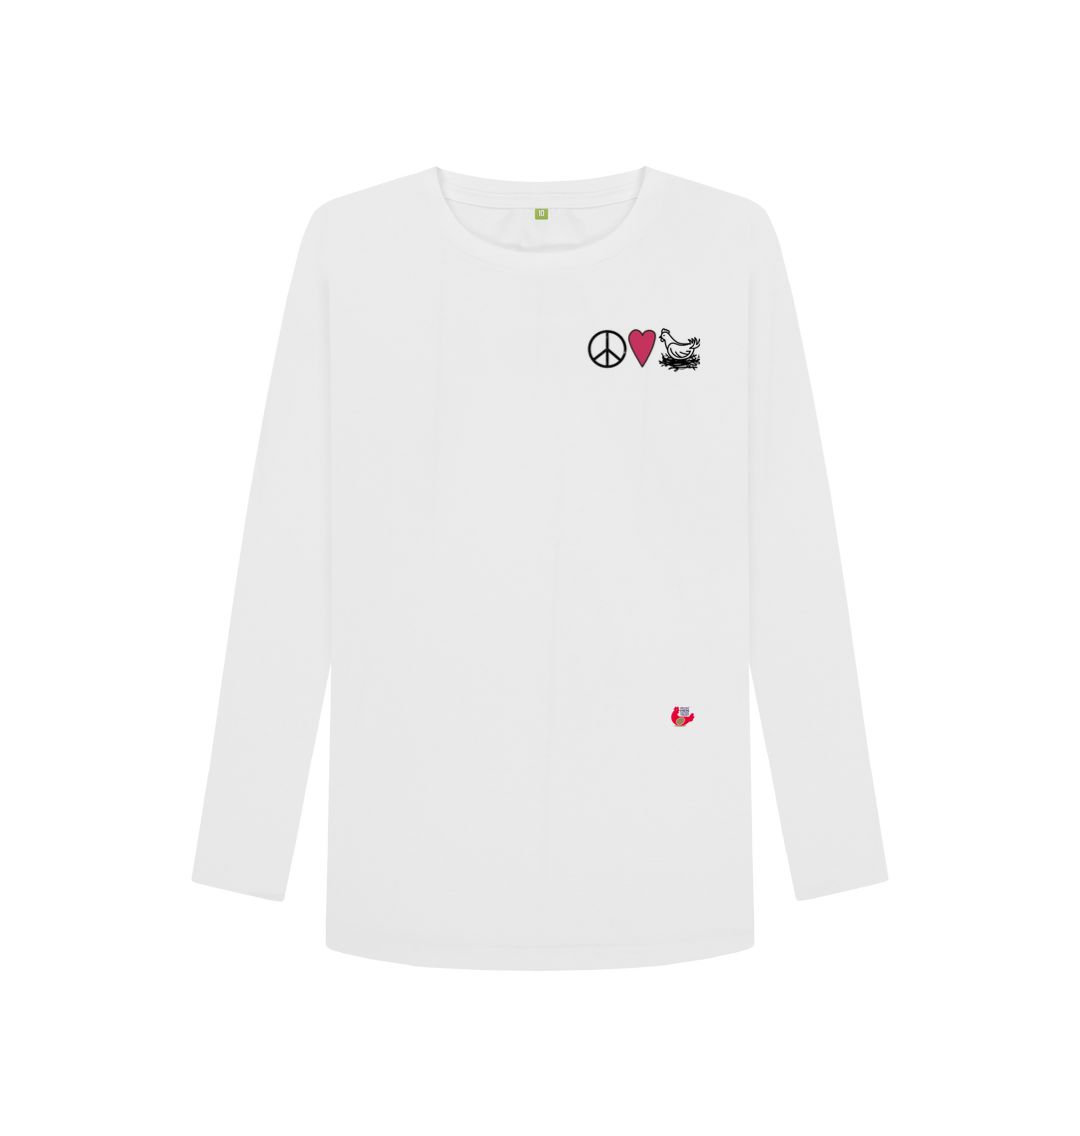 White Women's Long Sleeve T-Shirt - Peace Love & Chickens - Small Logo